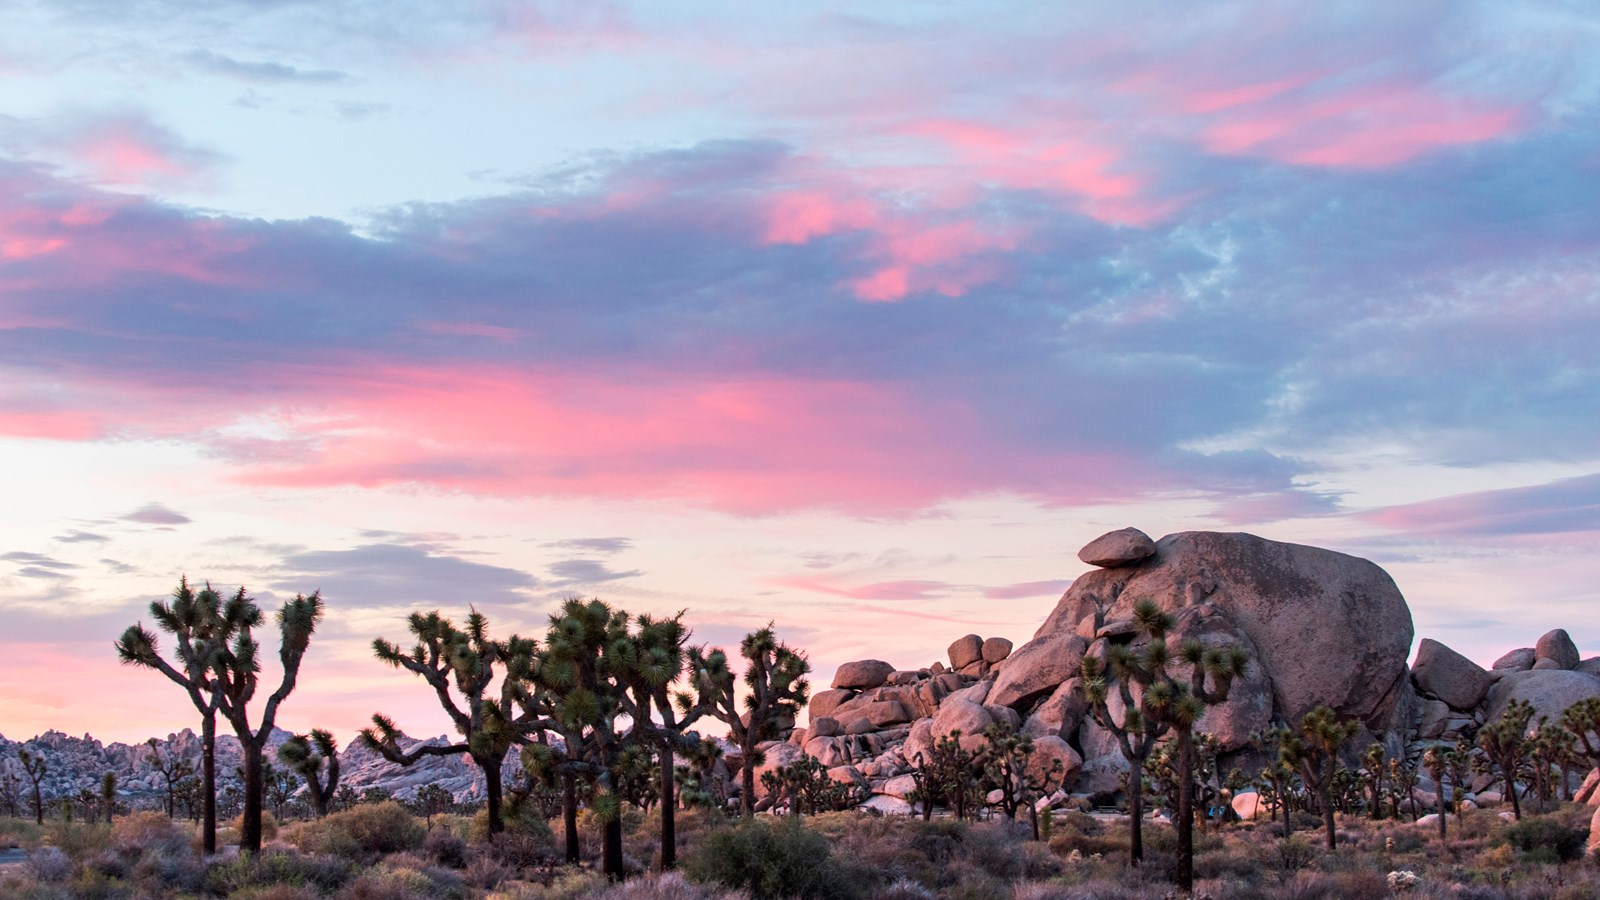 A large rock formation with Joshua trees in the foreground under clouds lit pink by the sunset.